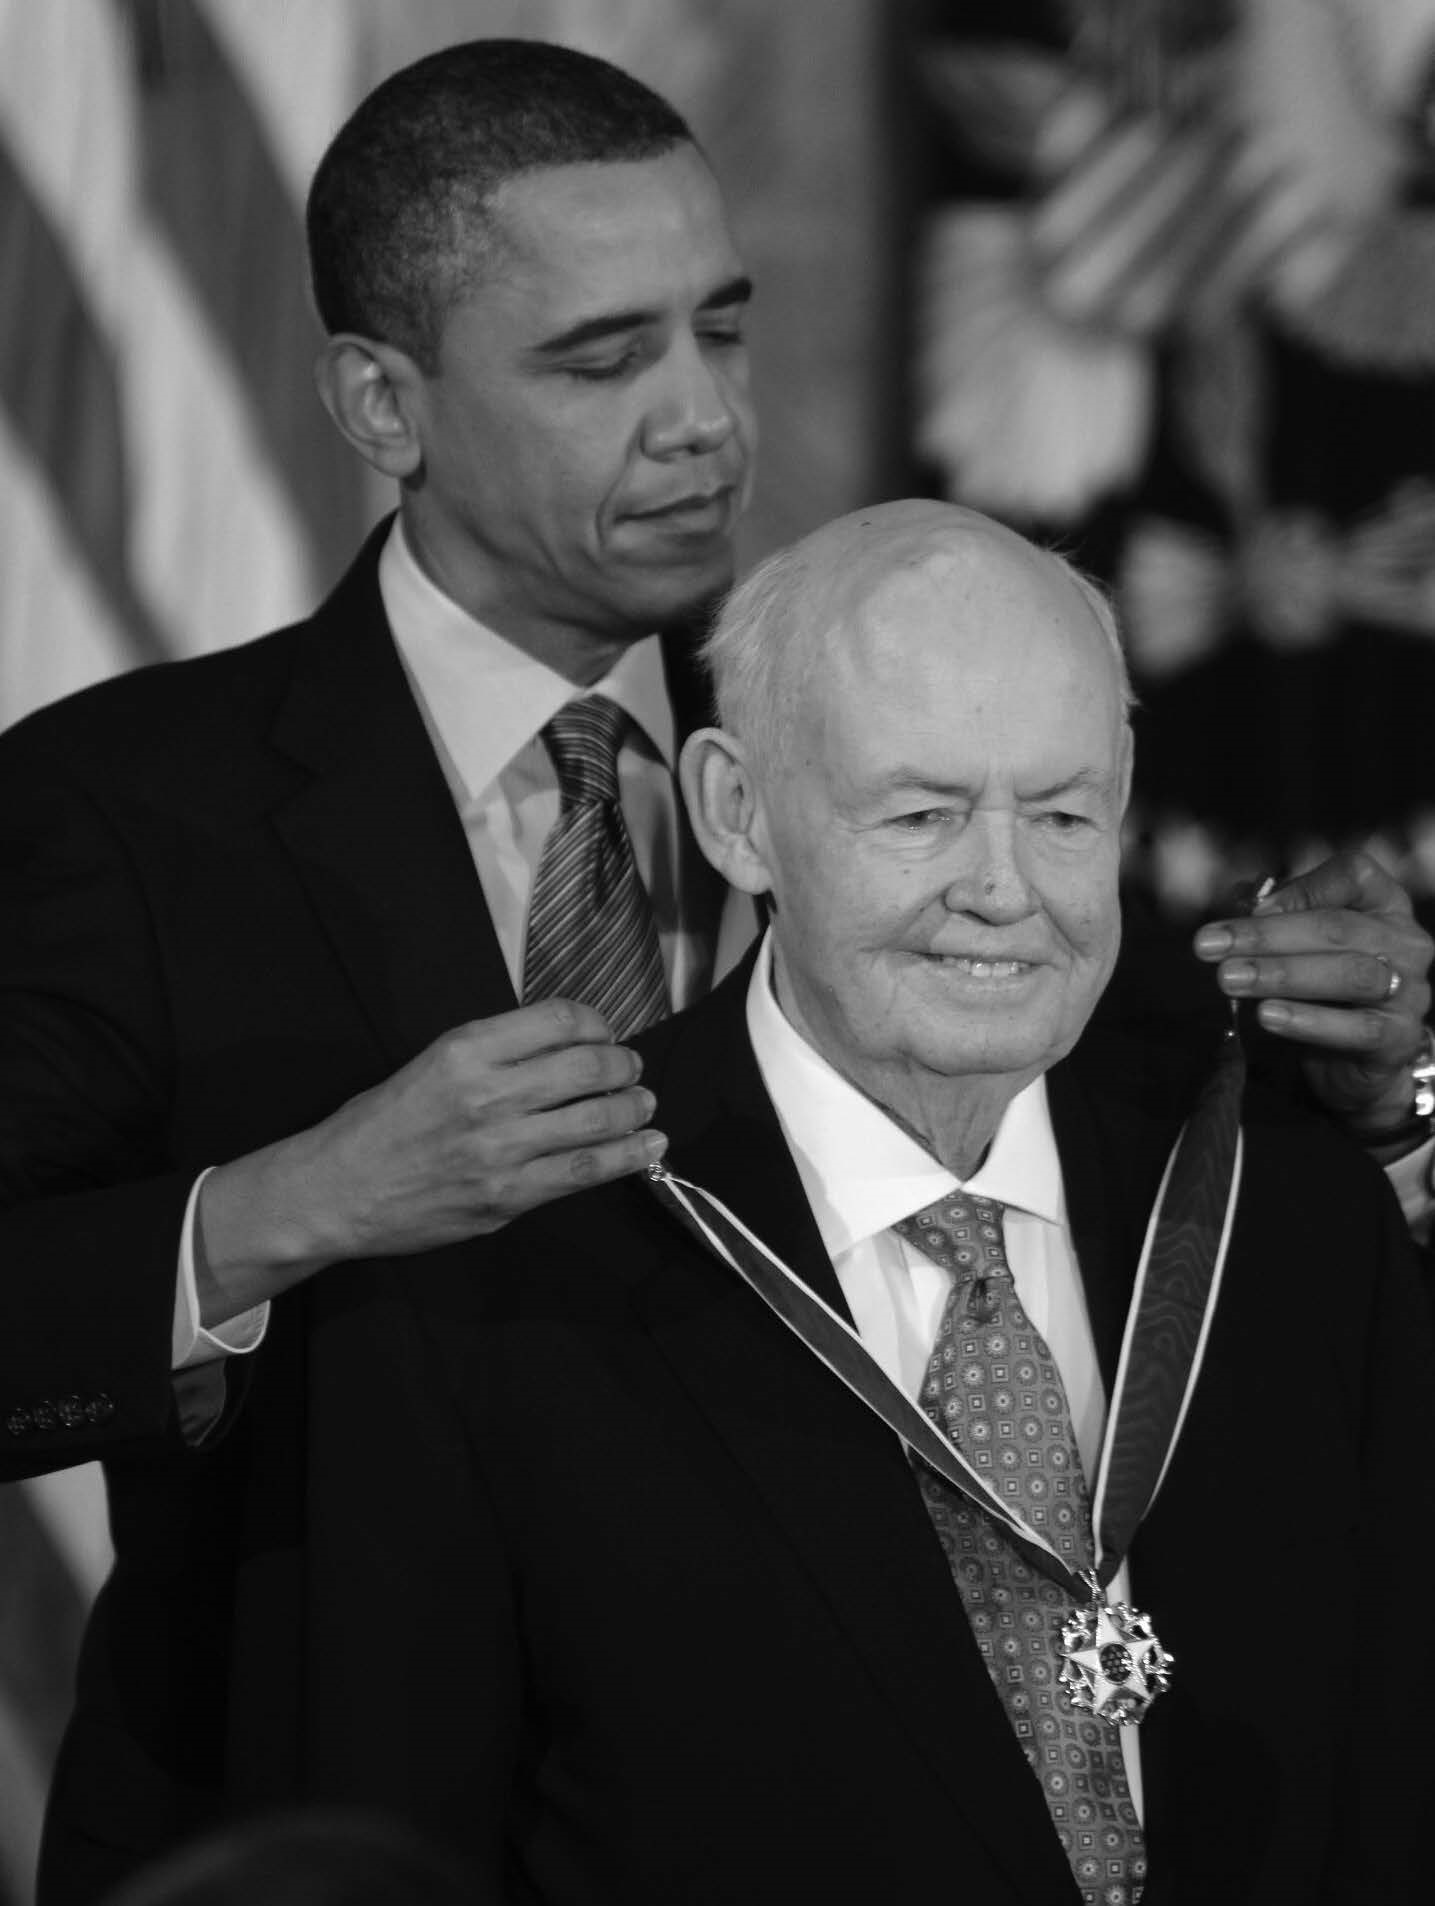 President Barack Obama presenting John Sweeney with the Presidential Medal of Freedom in 2010. Sweeney’s successor said, “John viewed his leadership as a spiritual calling, a divine act of solidarity in a world plagued by distance and division.” Credit: Charles Dharapak/Associated Press